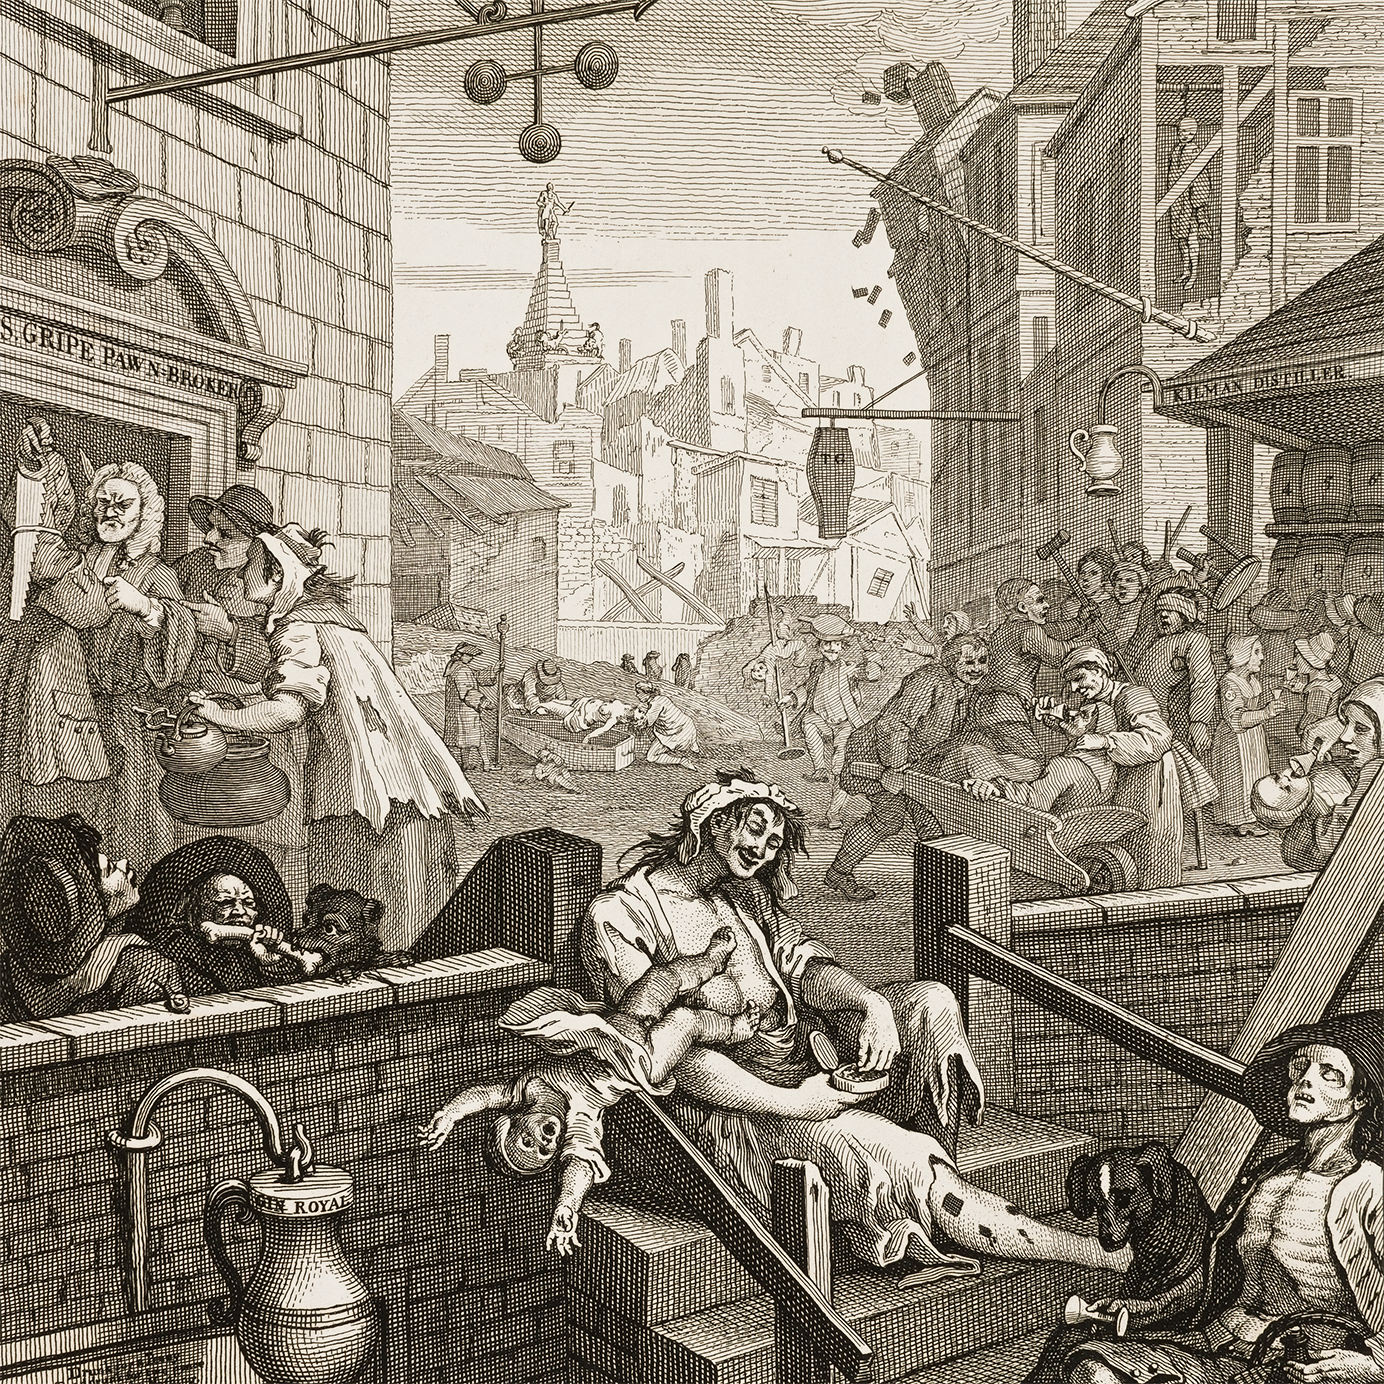 The Complete and Slightly Insane History of Gin in England